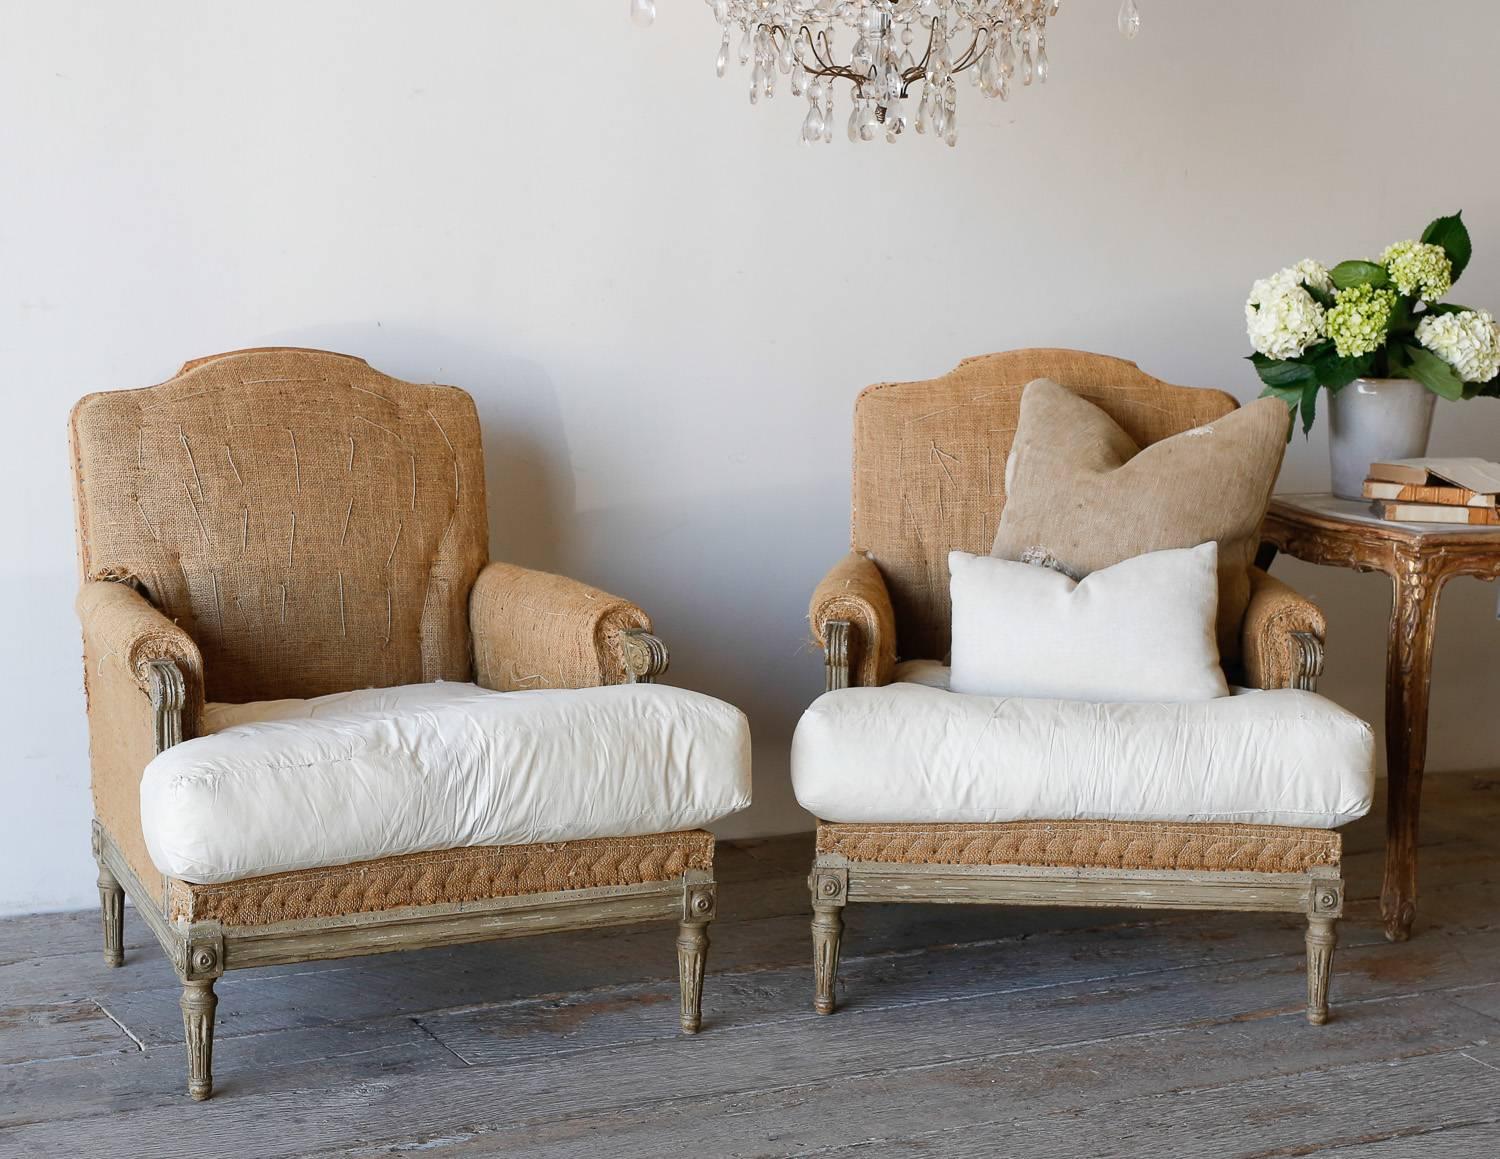 Stunning pair of bergeres in sandy olive. The chairs boast fluffy, comfortable down cushions and deep proportions. Upholstered in burlap with exposed wood backs and Classic Louis XVI fluted legs. Carved medallions decorate the legs and make this